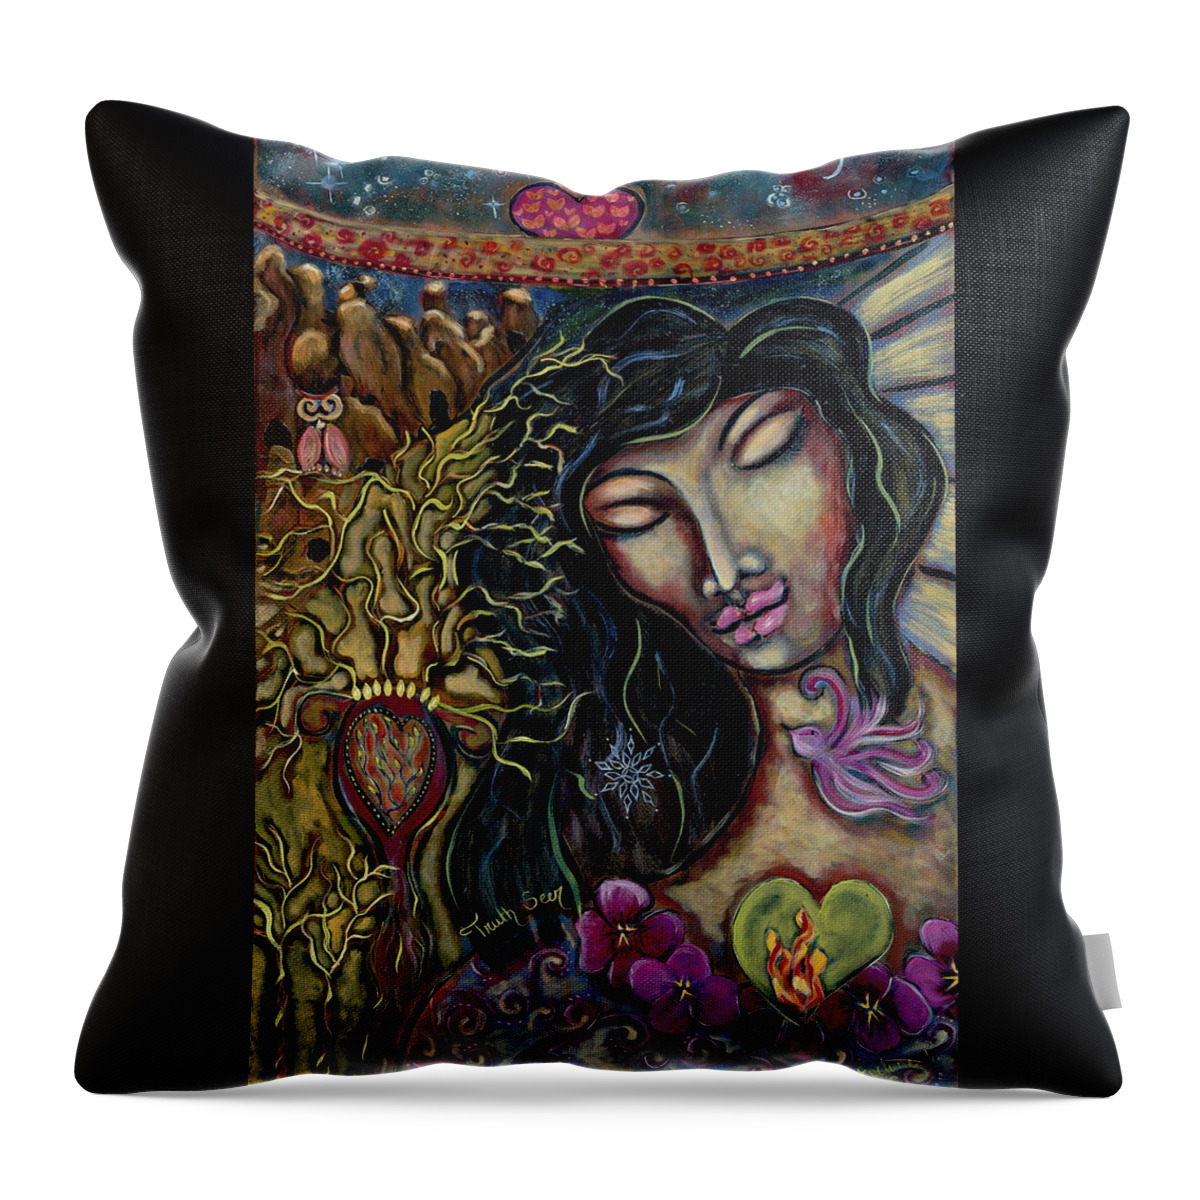 Intentional Creativity Throw Pillow featuring the painting Truth Seer by Evelyne Verret